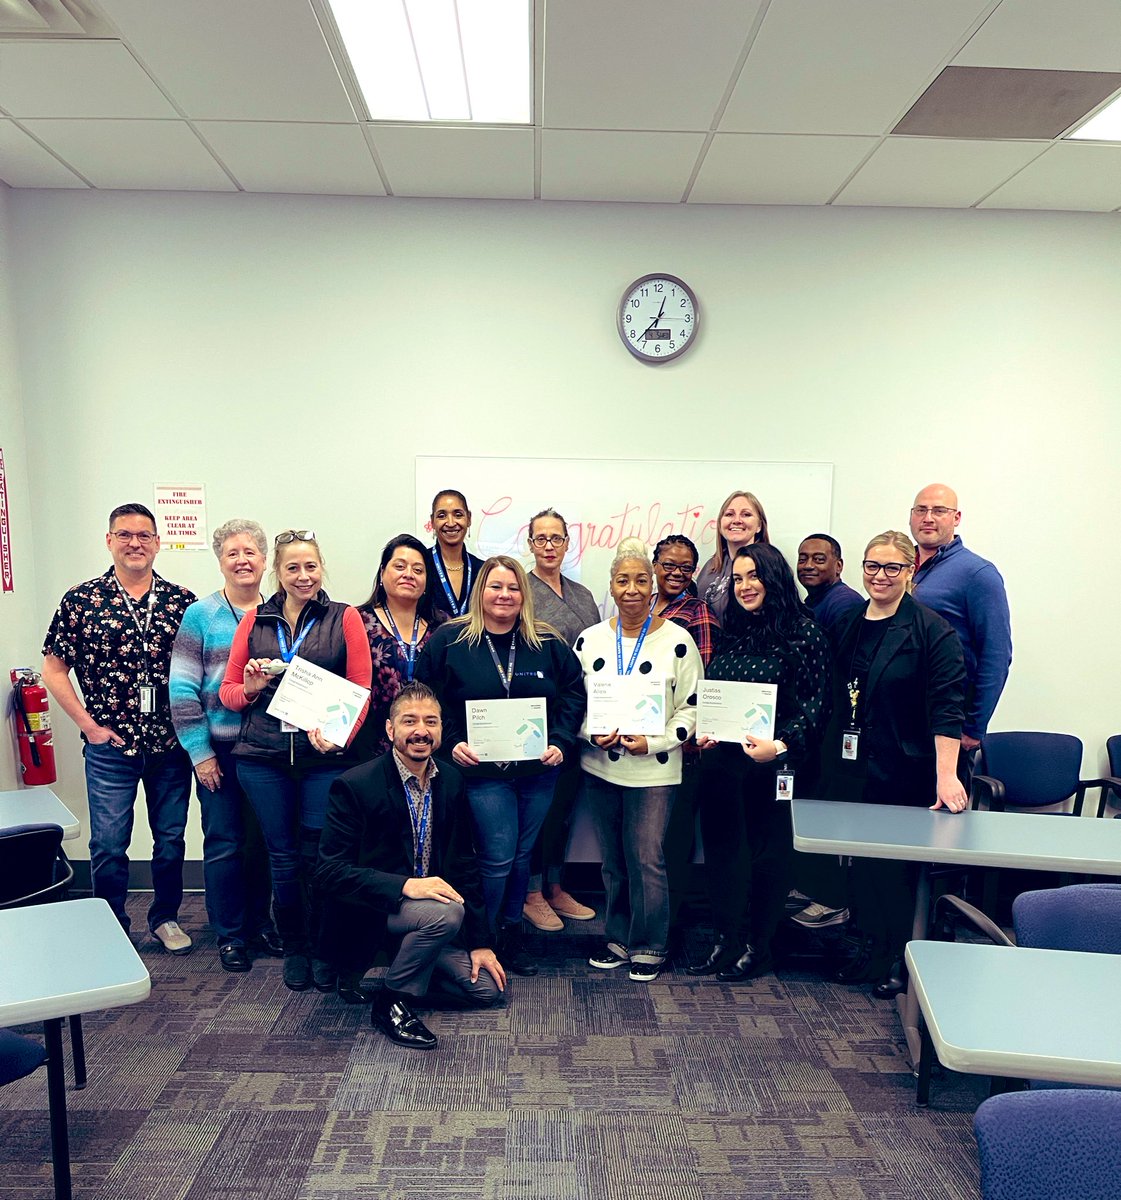 ✈️ Congratulations to our recent Orientation Graduates. We are so proud of you and what you all have accomplished! ✈️ @weareunited @WonderlandSarah #GoodLeadsTheWay